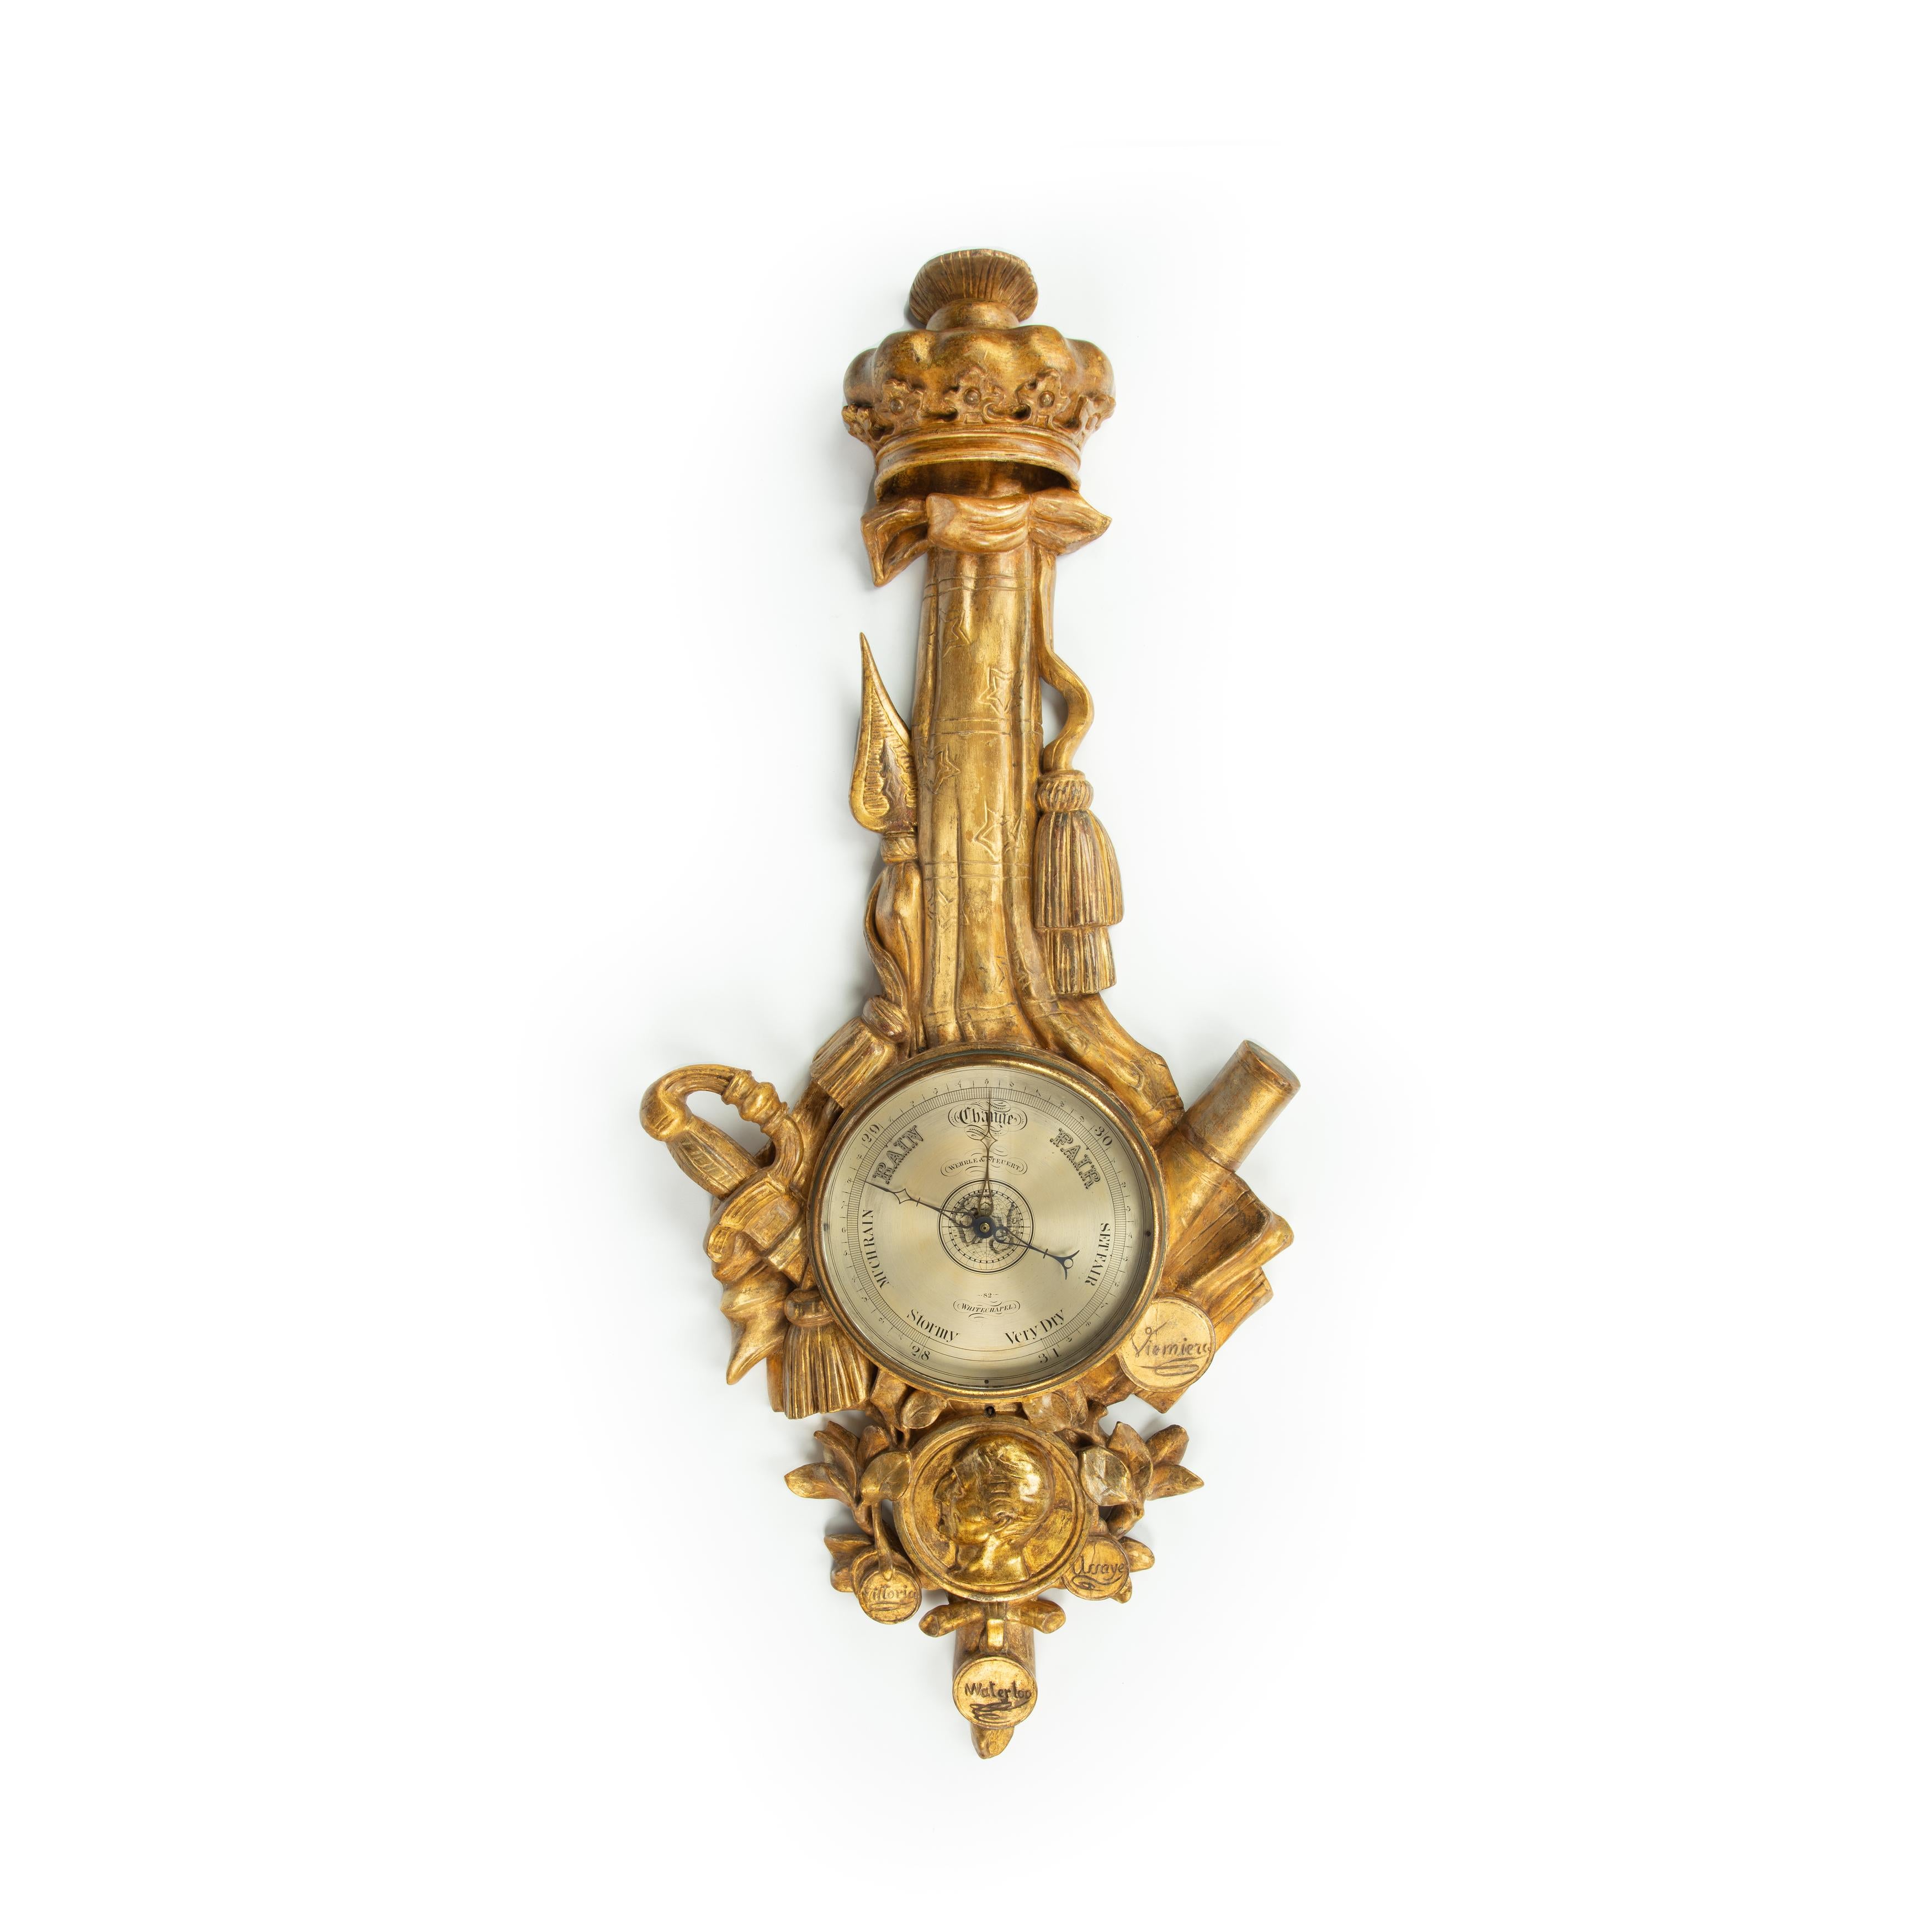 This carved giltwood barometer is in the form of a military trophy of arms surmounted by a ducal coronet.  It comprises a sword hilt, cannon barrels and standards surrounding a portrait medallion of Arthur, 1st Duke of Wellington, in profile, and